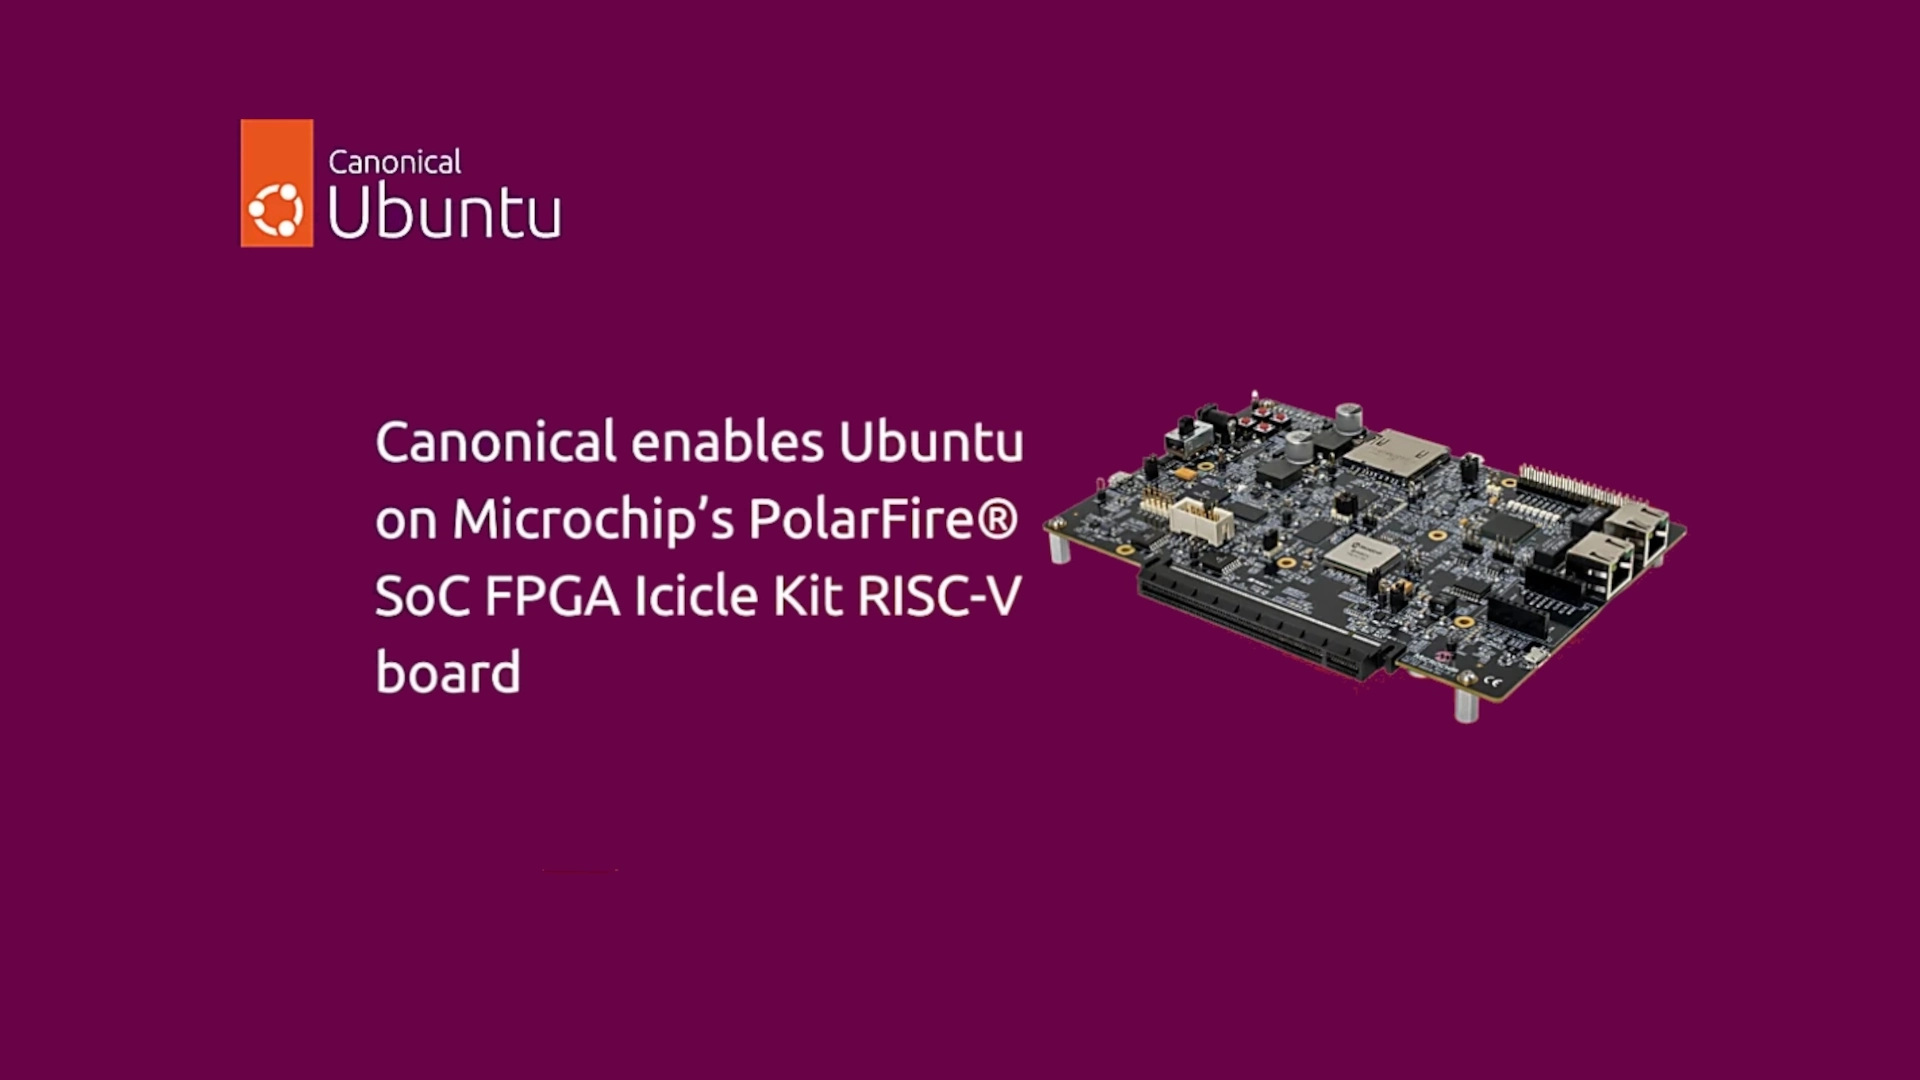 Ubuntu Now Officially Supports Microchip’s PolarFire SoC FPGA Icicle Kit RISC-V Board